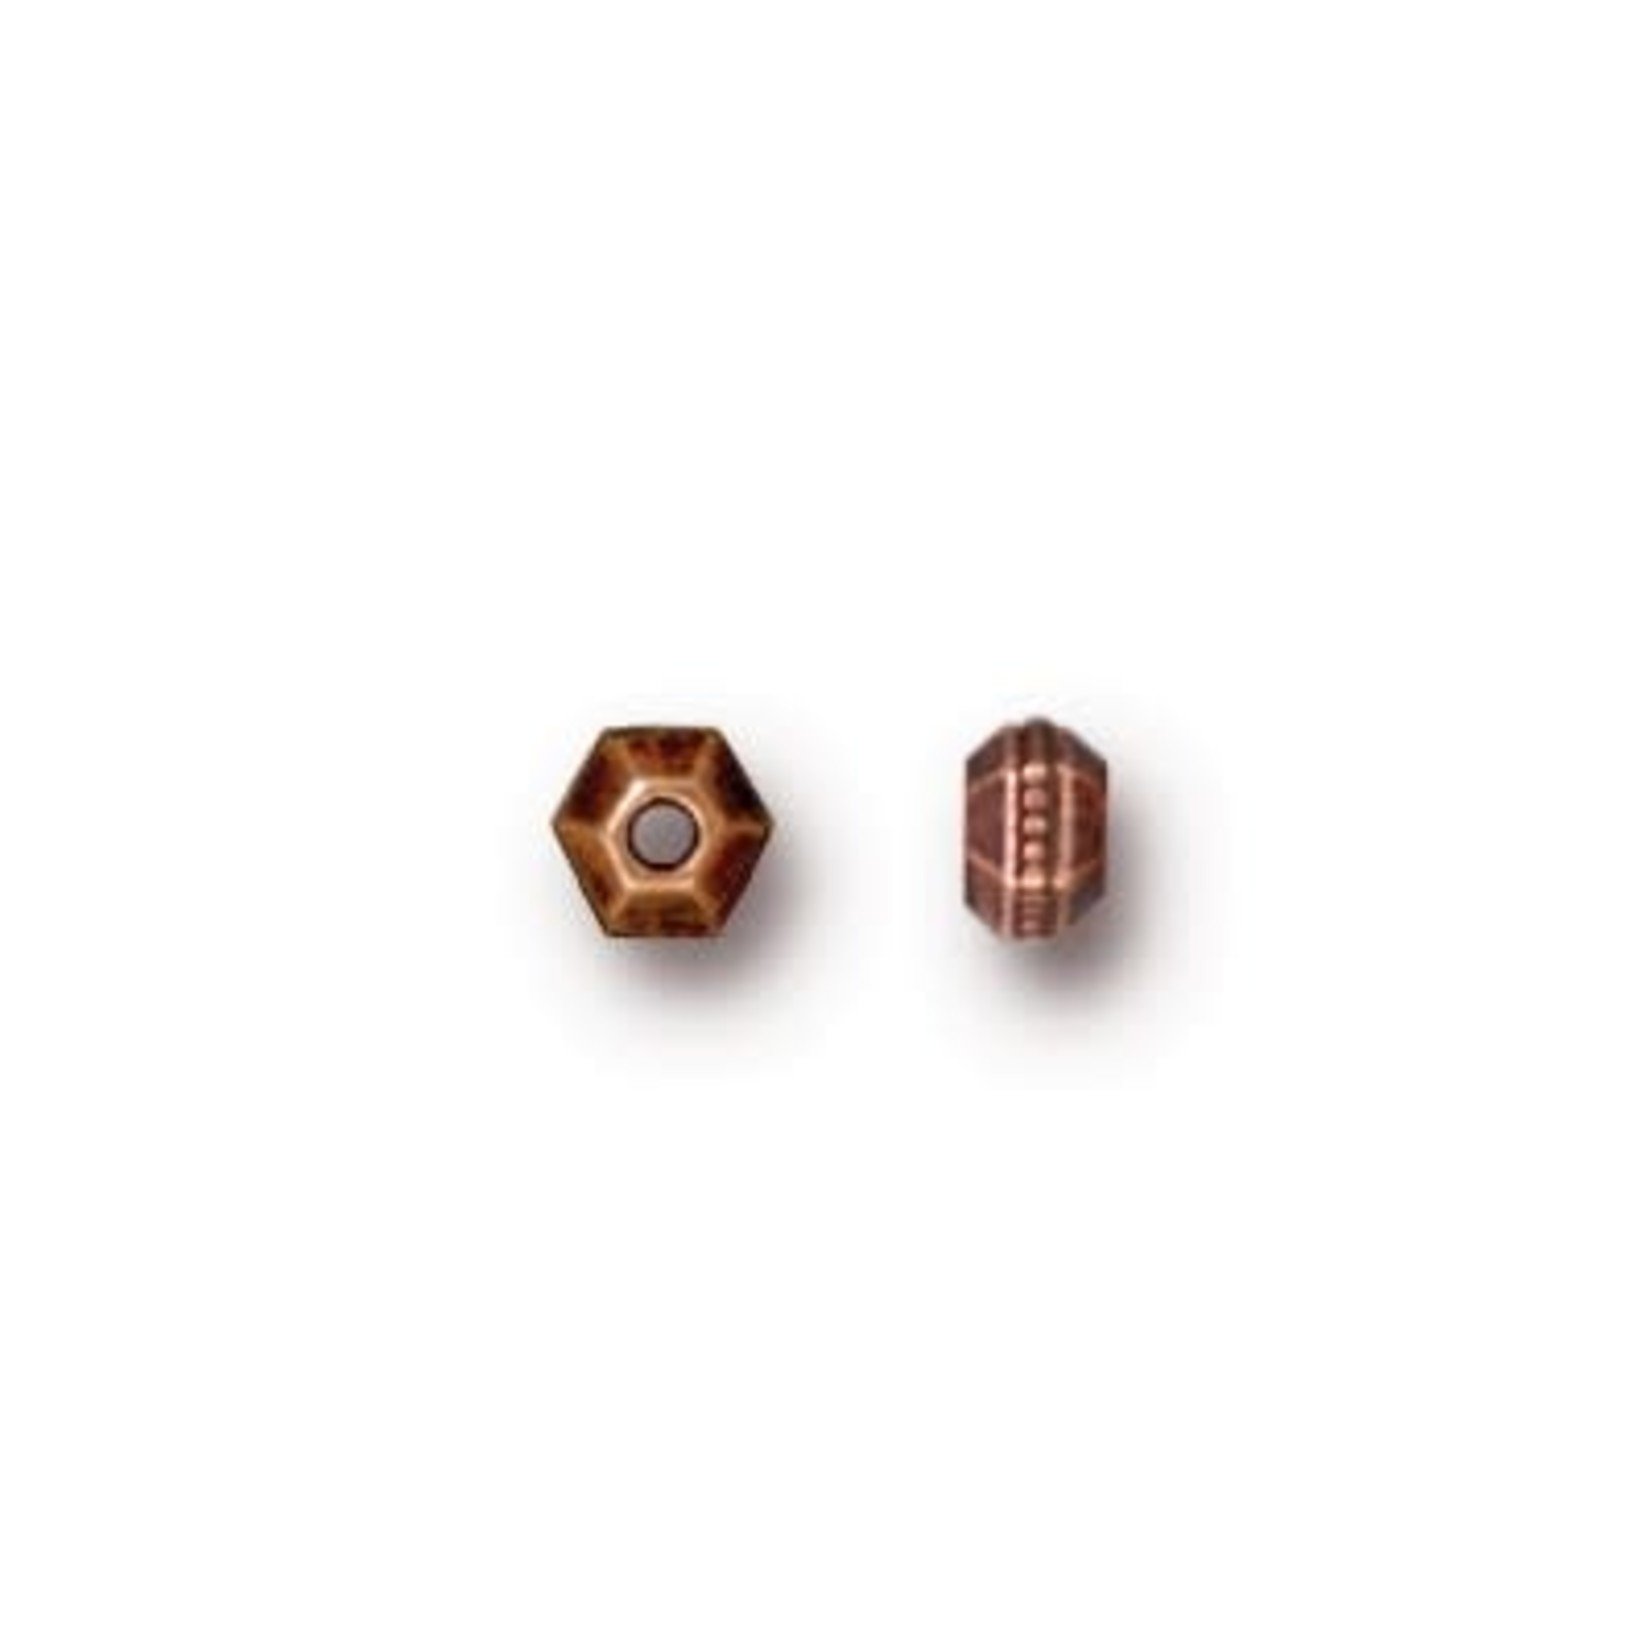 Faceted 3mm Hexagon Spacer Bead Antique Copper Plated - 100 pieces